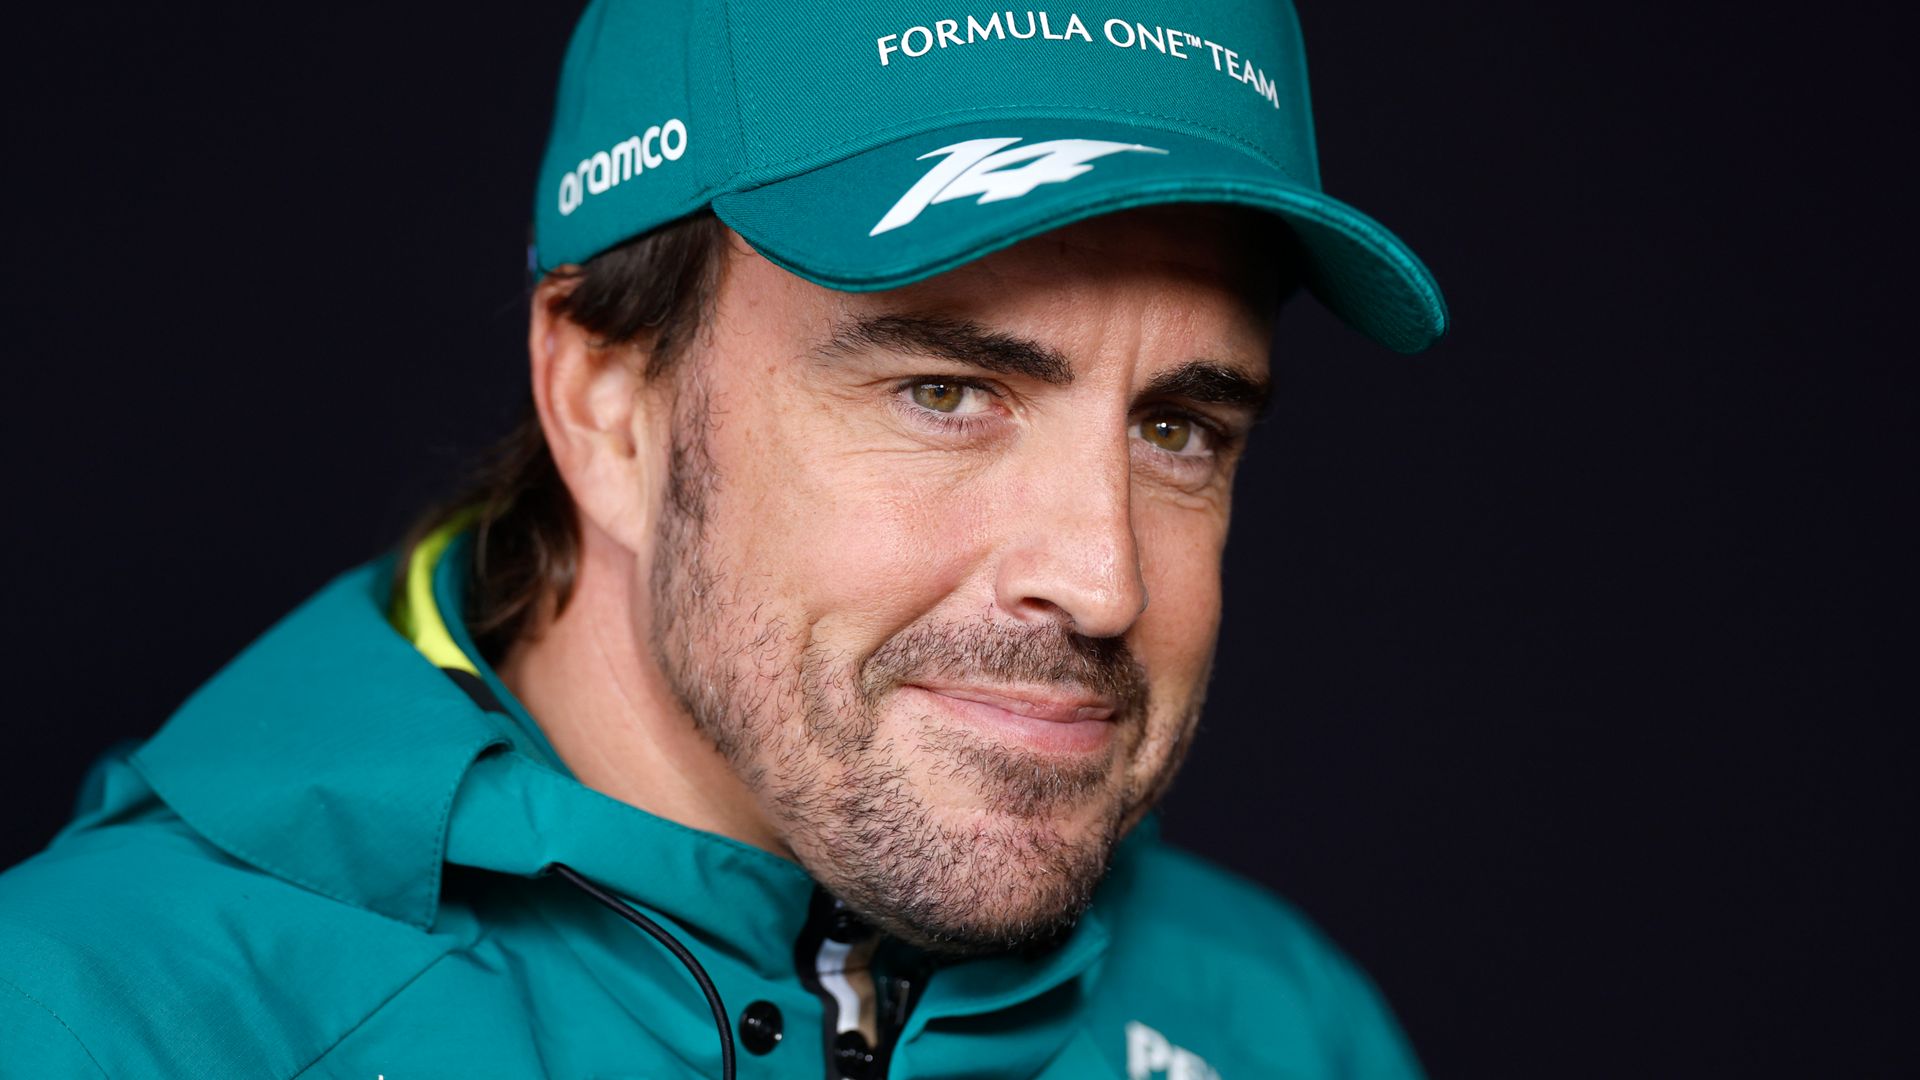 ‘Only one champion available’ - Alonso on his place in F1's driver market